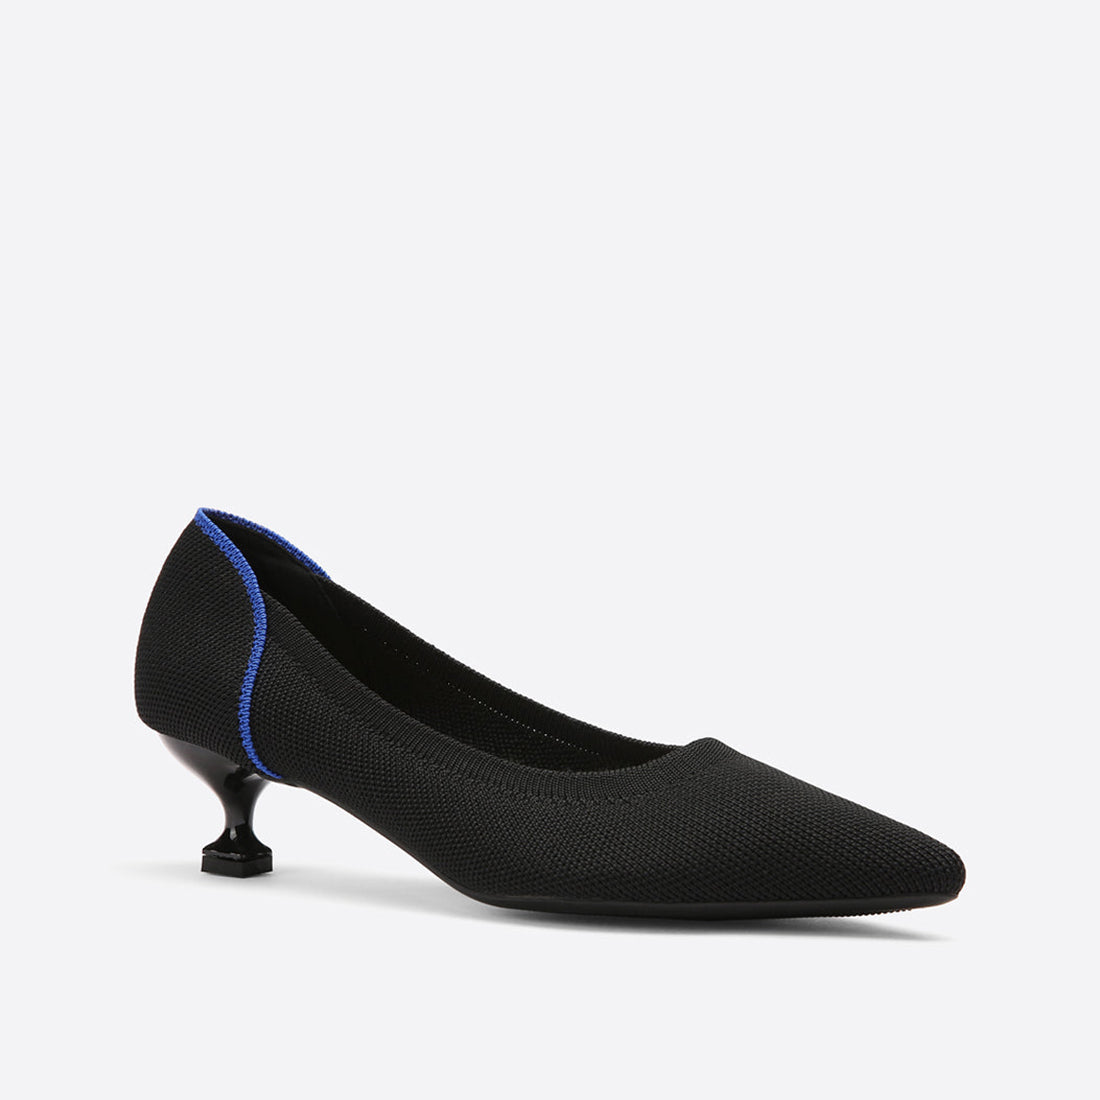 MOUSSE FIT Women Classic Pointed Toe Slip-On Pumps